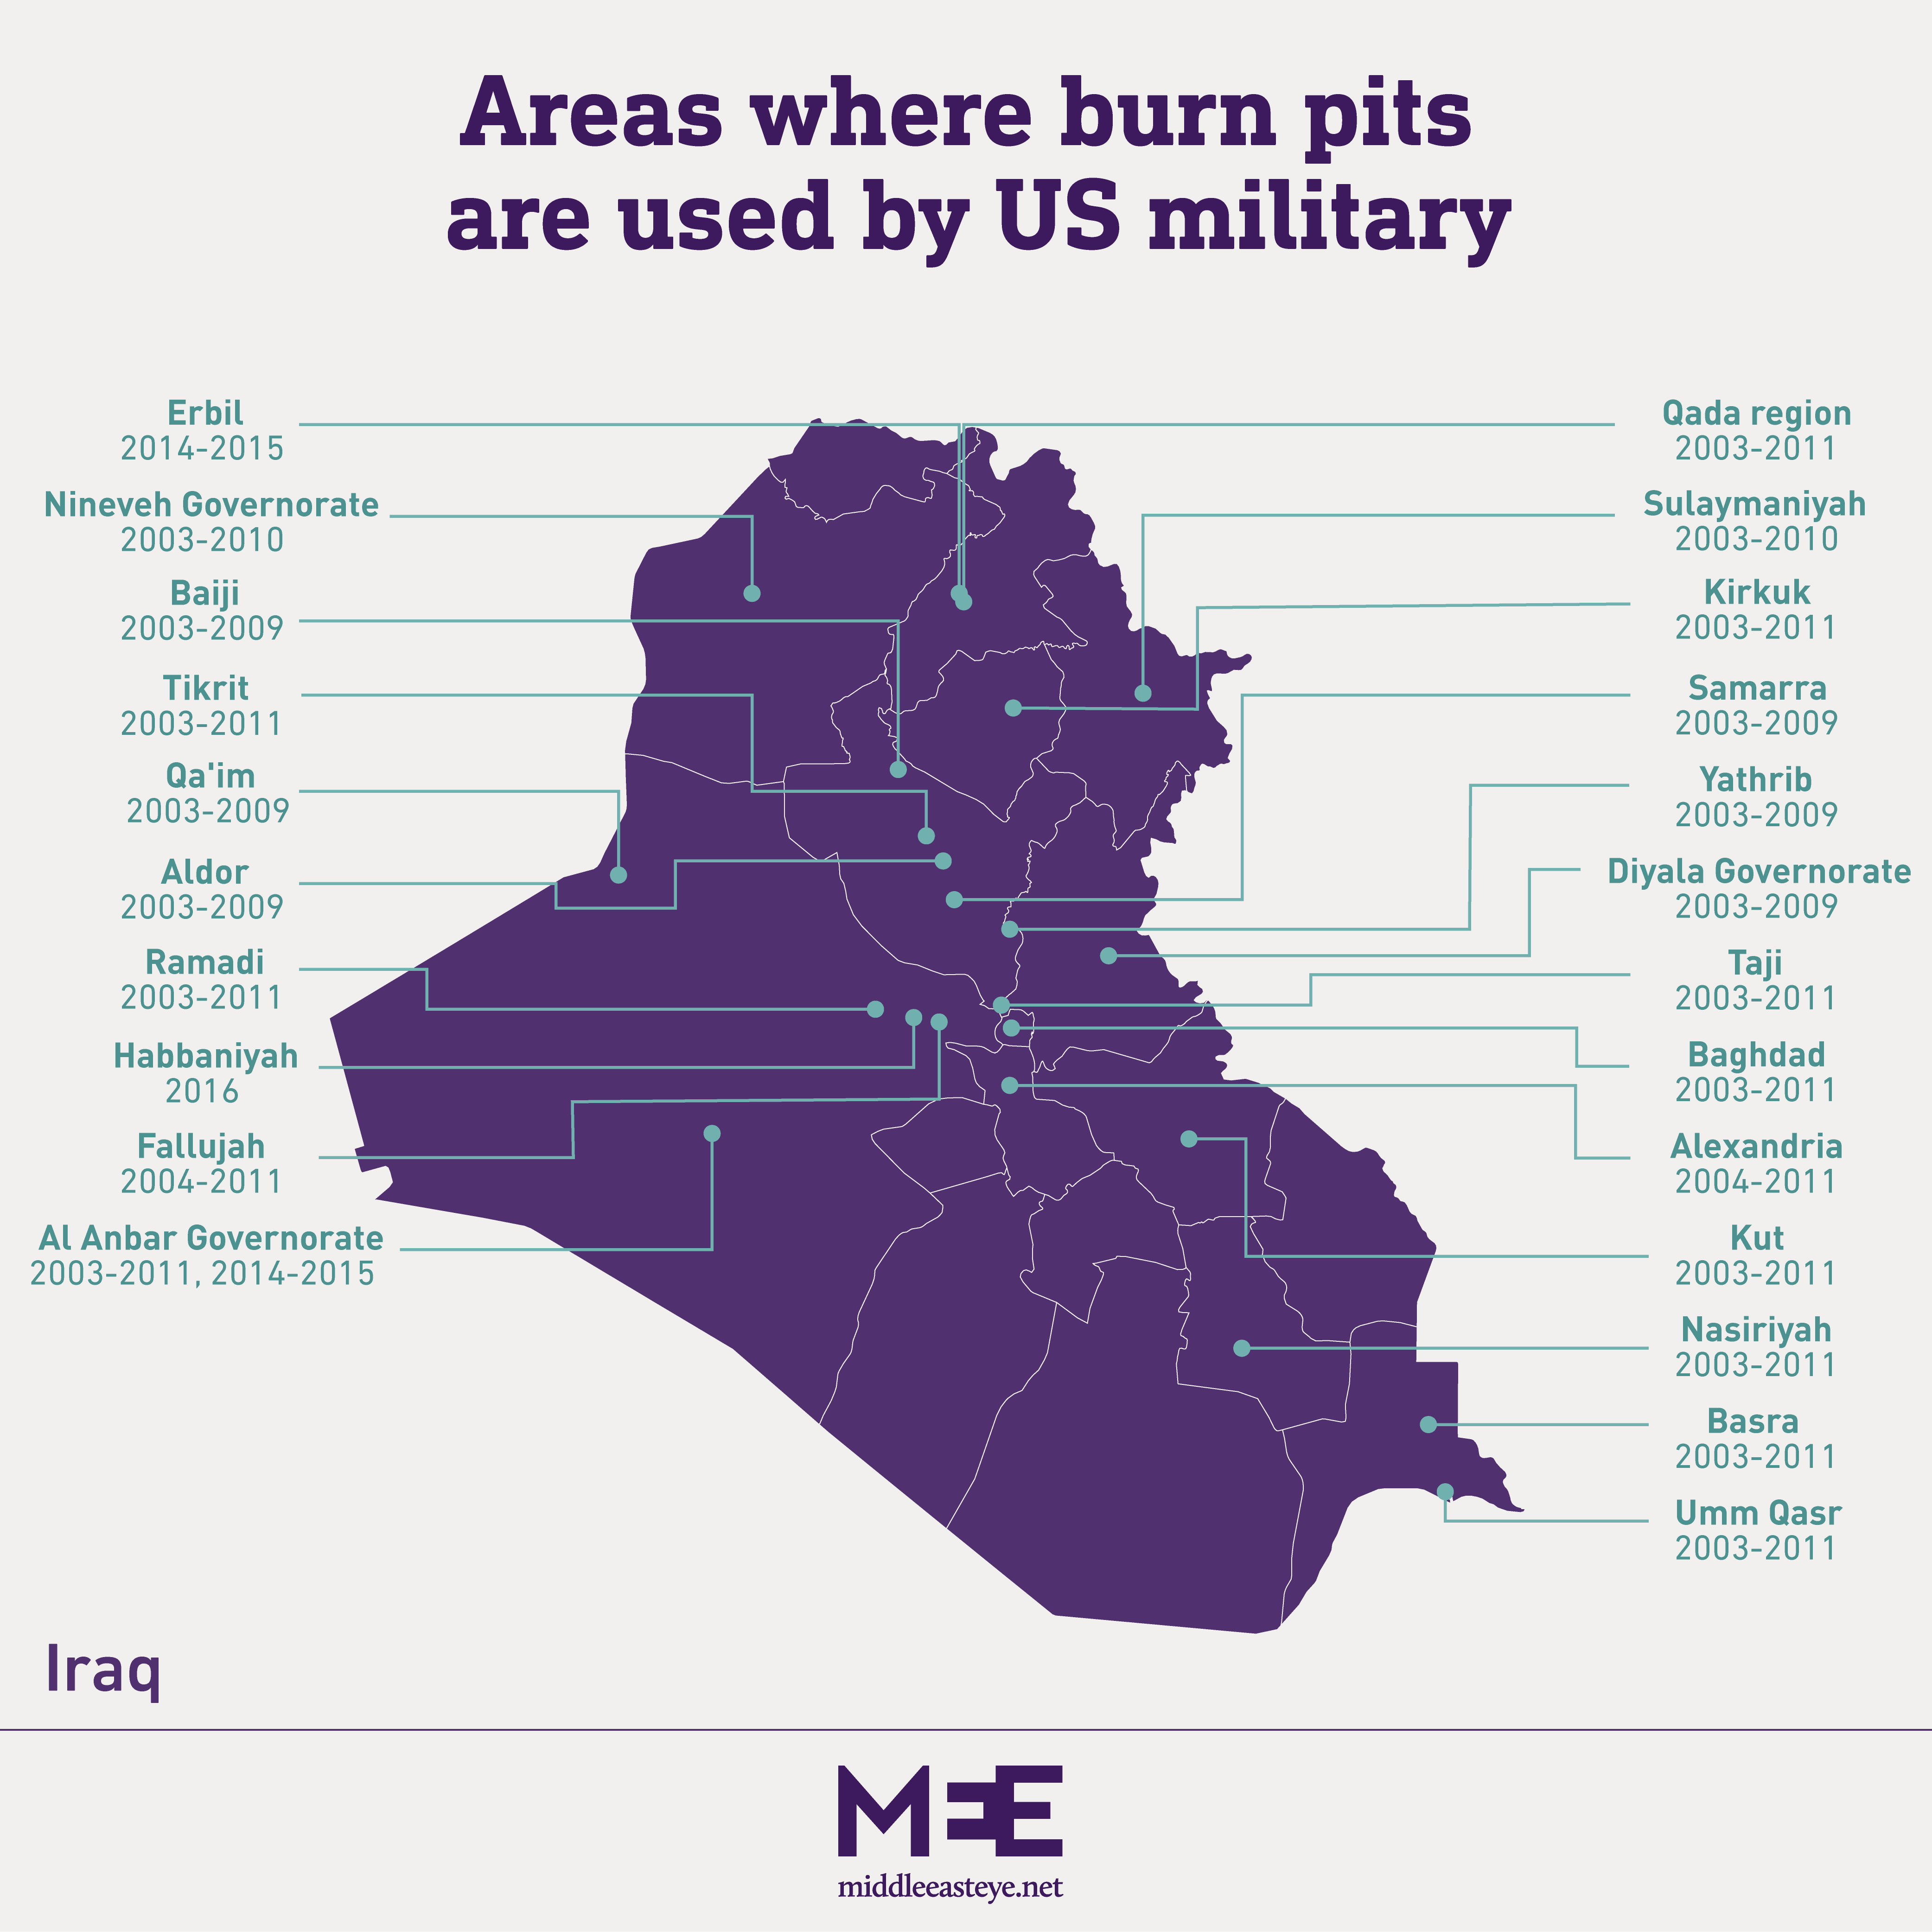 According to the Pentagon, the majority of sites where burn pits were used were in Iraq